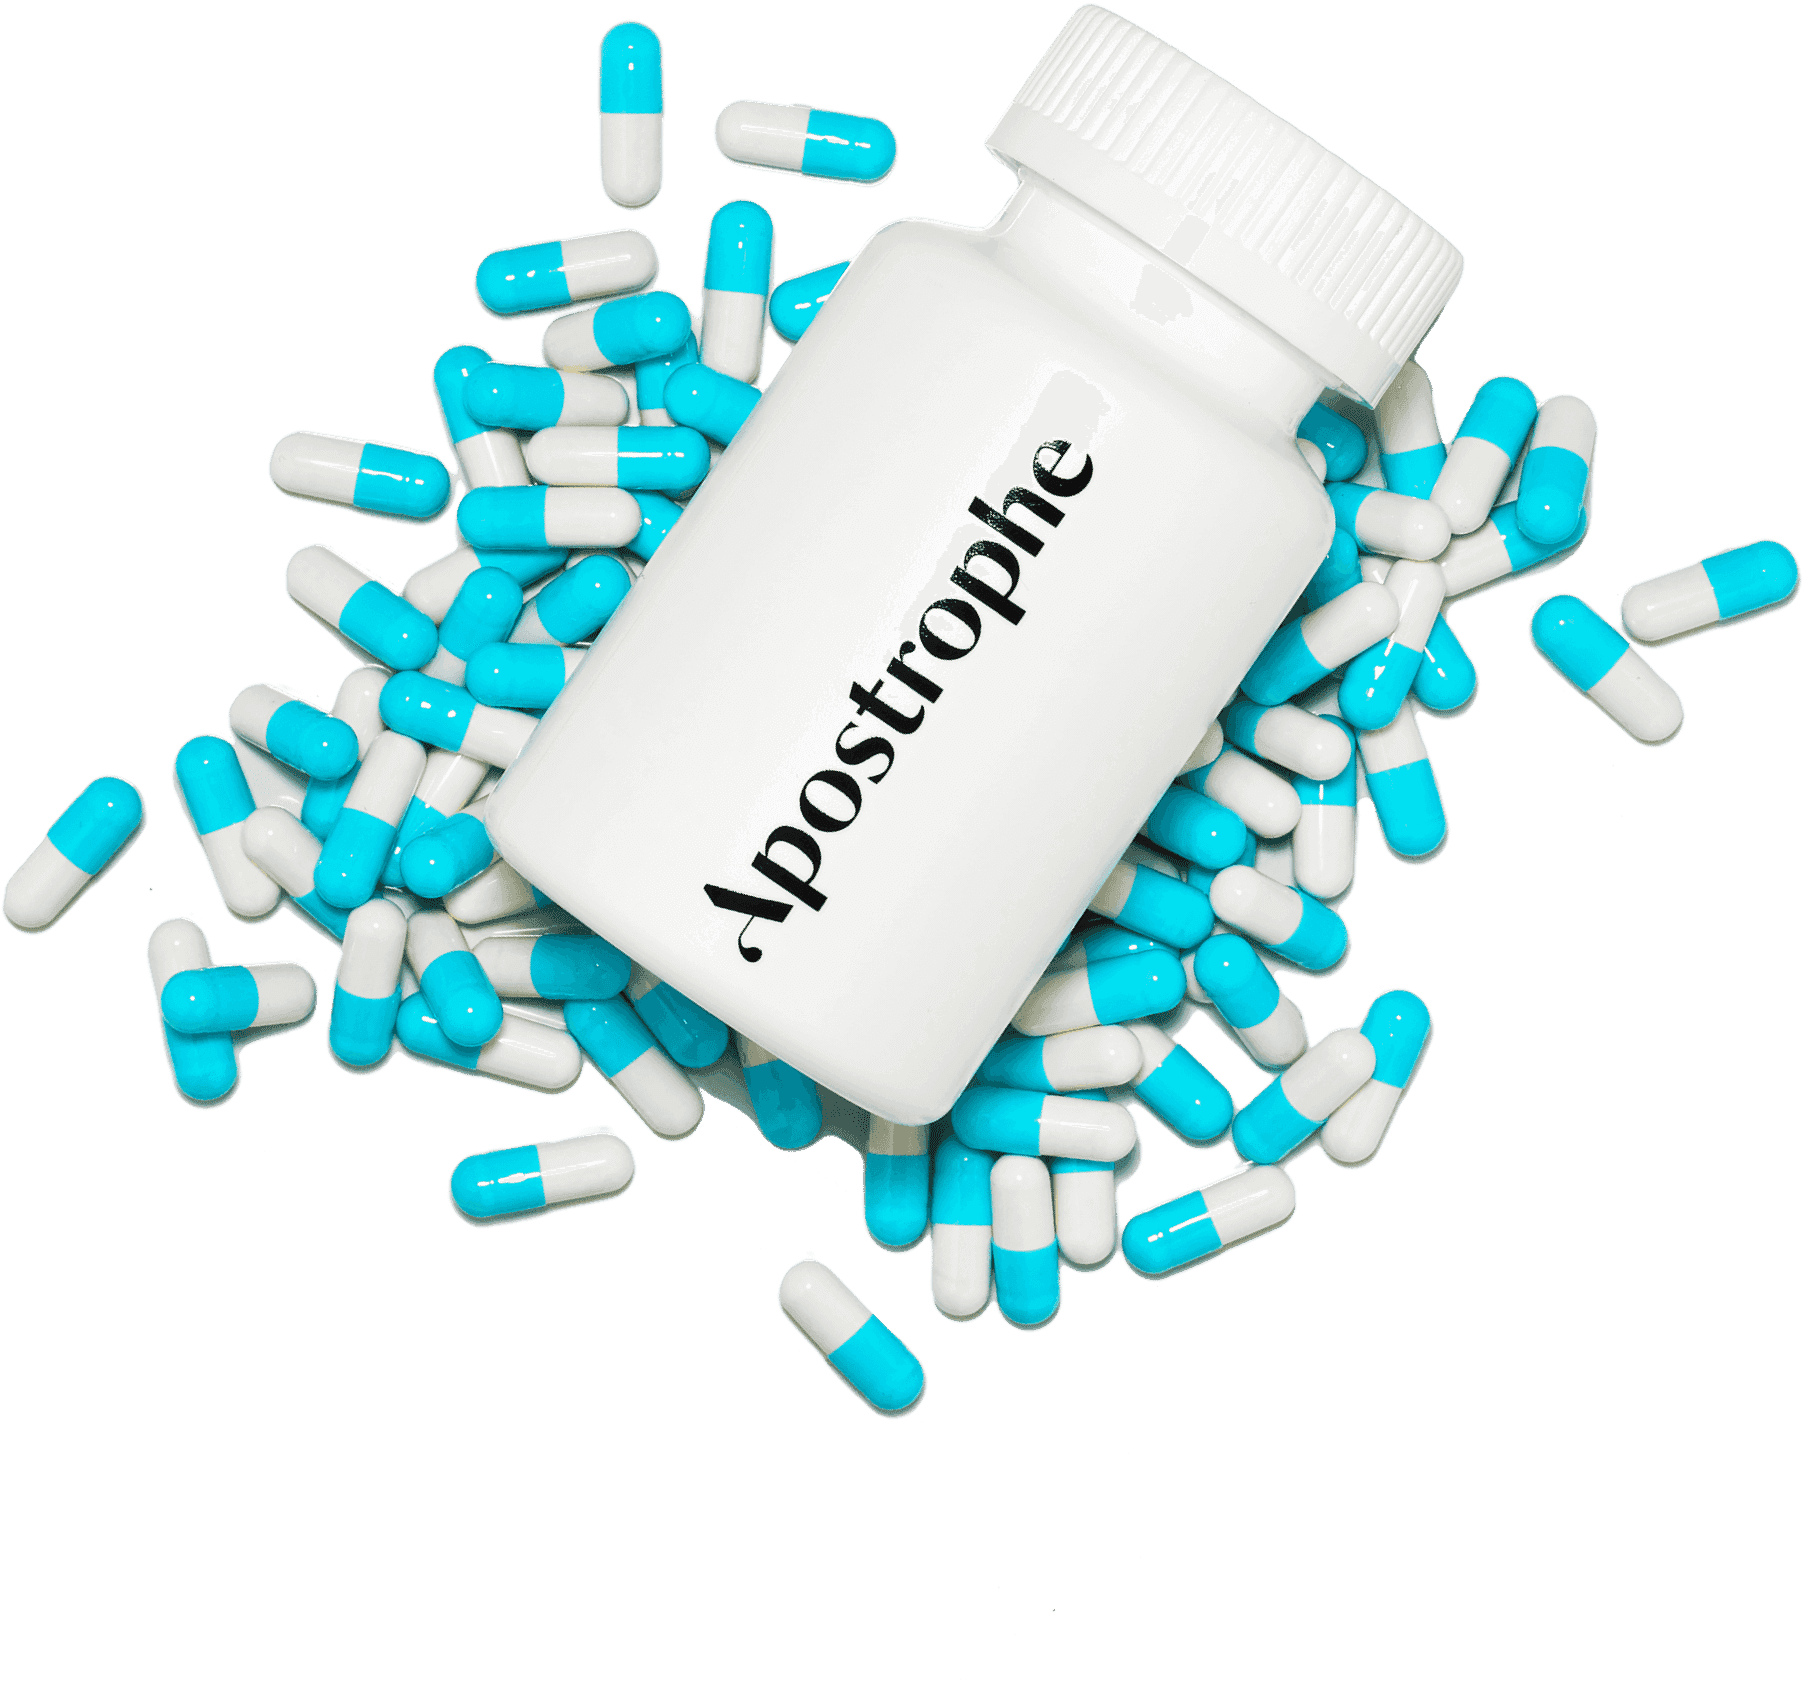 White Apostrophe pill bottle with black logo on top of a pile of half white and half blue pills.